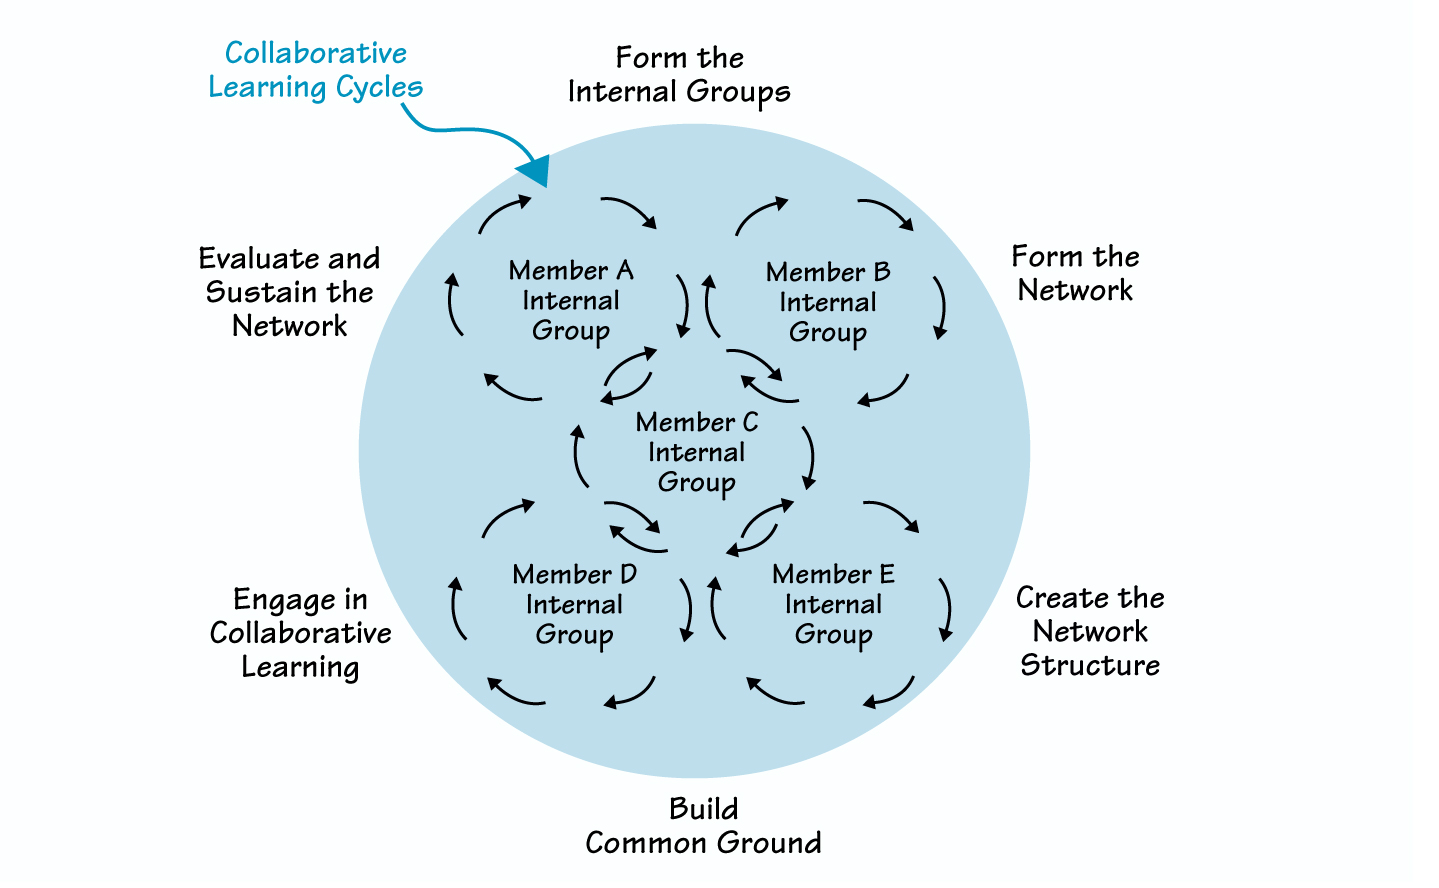 THE LEARNING NETWORK